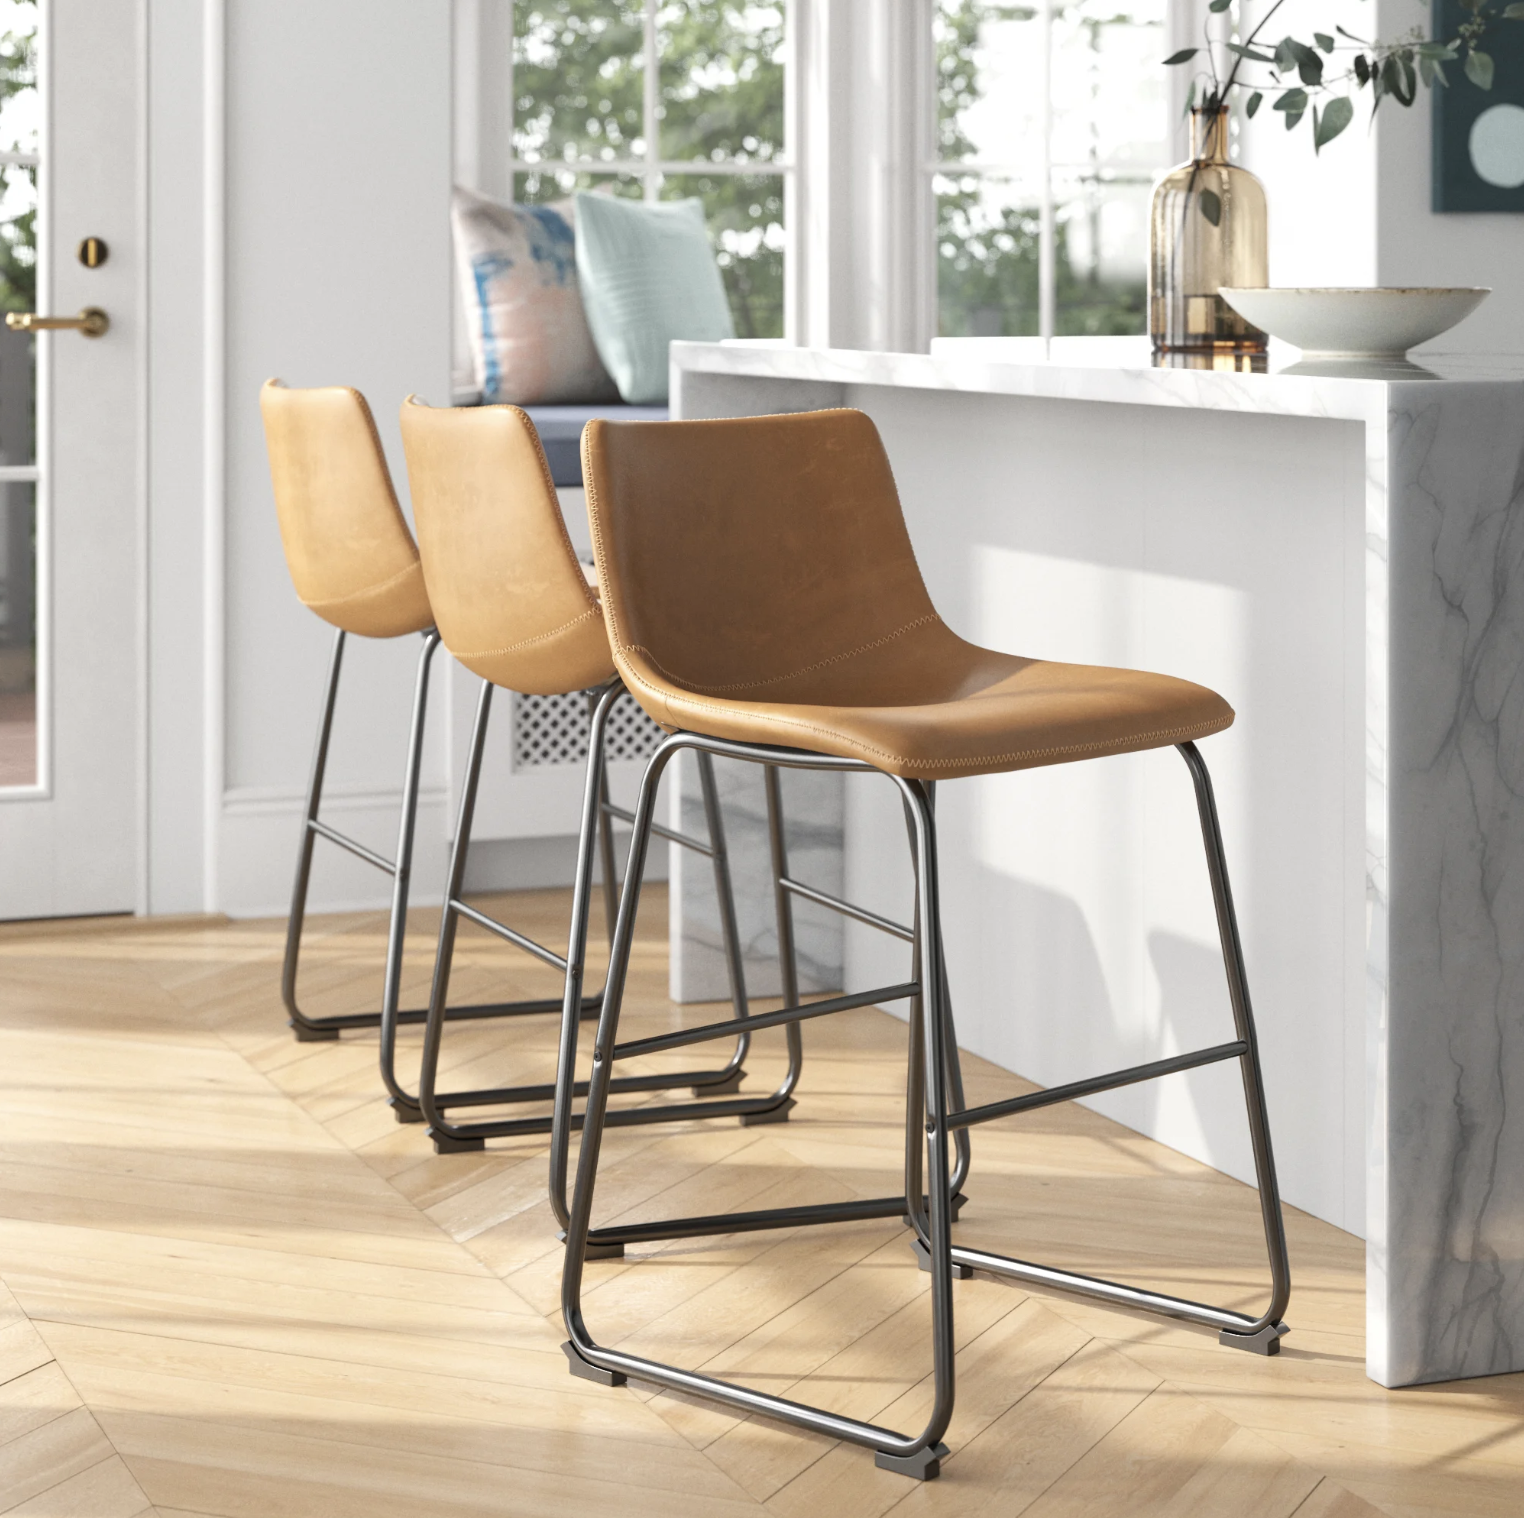 The three bar stool in a bright kitchen pulled up to a marble counter